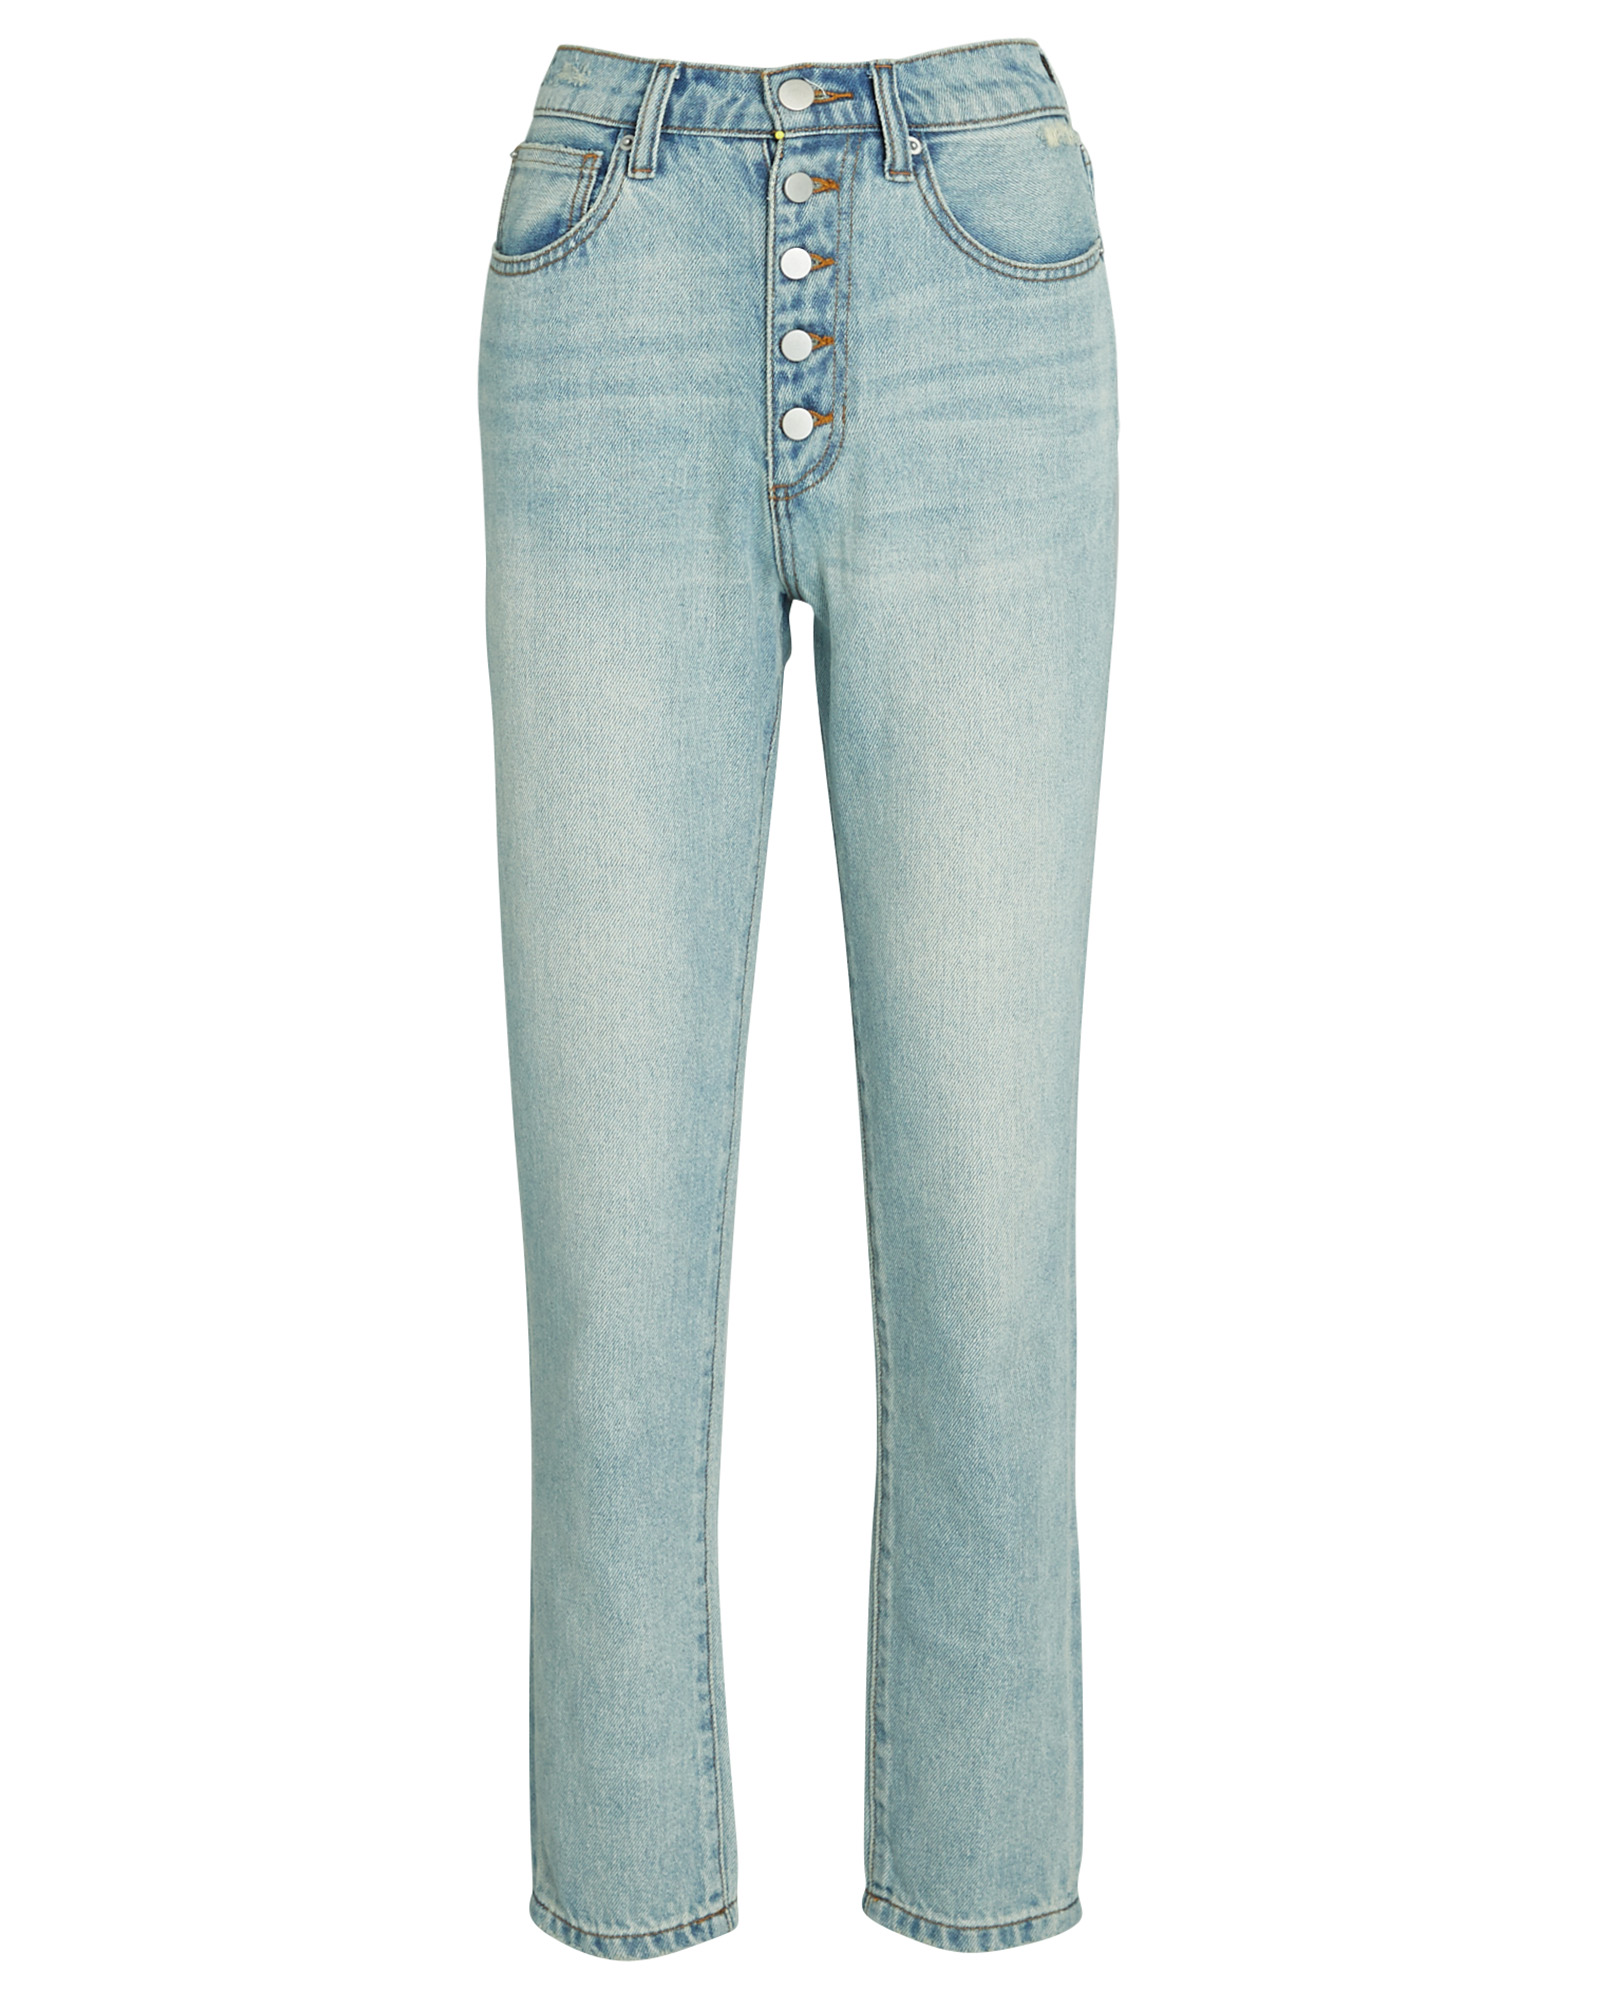 Weworewhat Danielle High-rise Skinny Jeans In Light Vintage | ModeSens